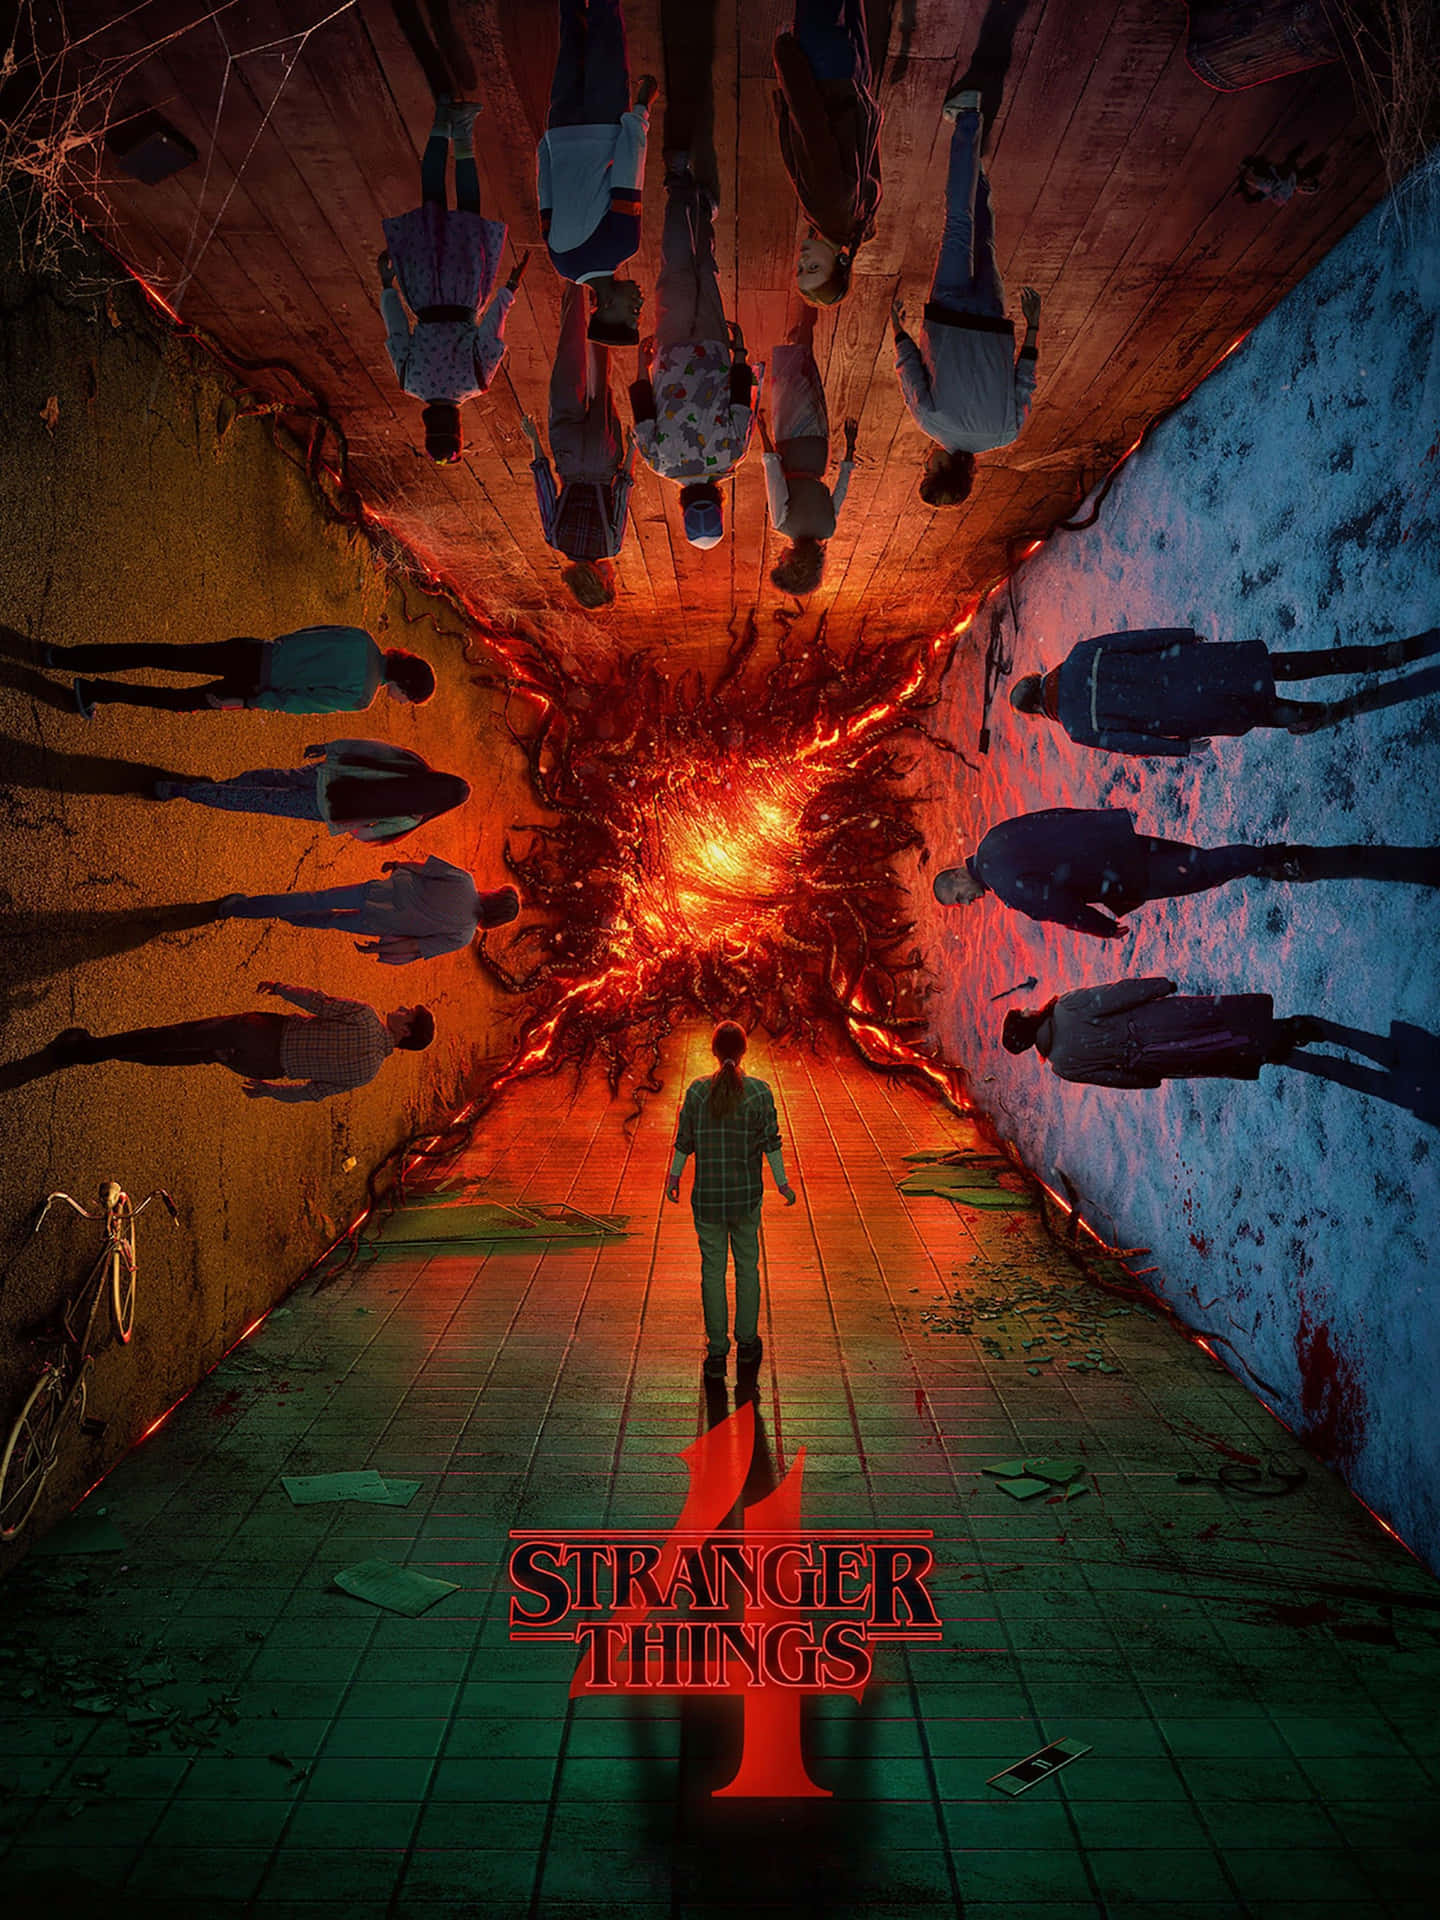 Strangerthings Stagione 4 Ritratto Poster Immagine